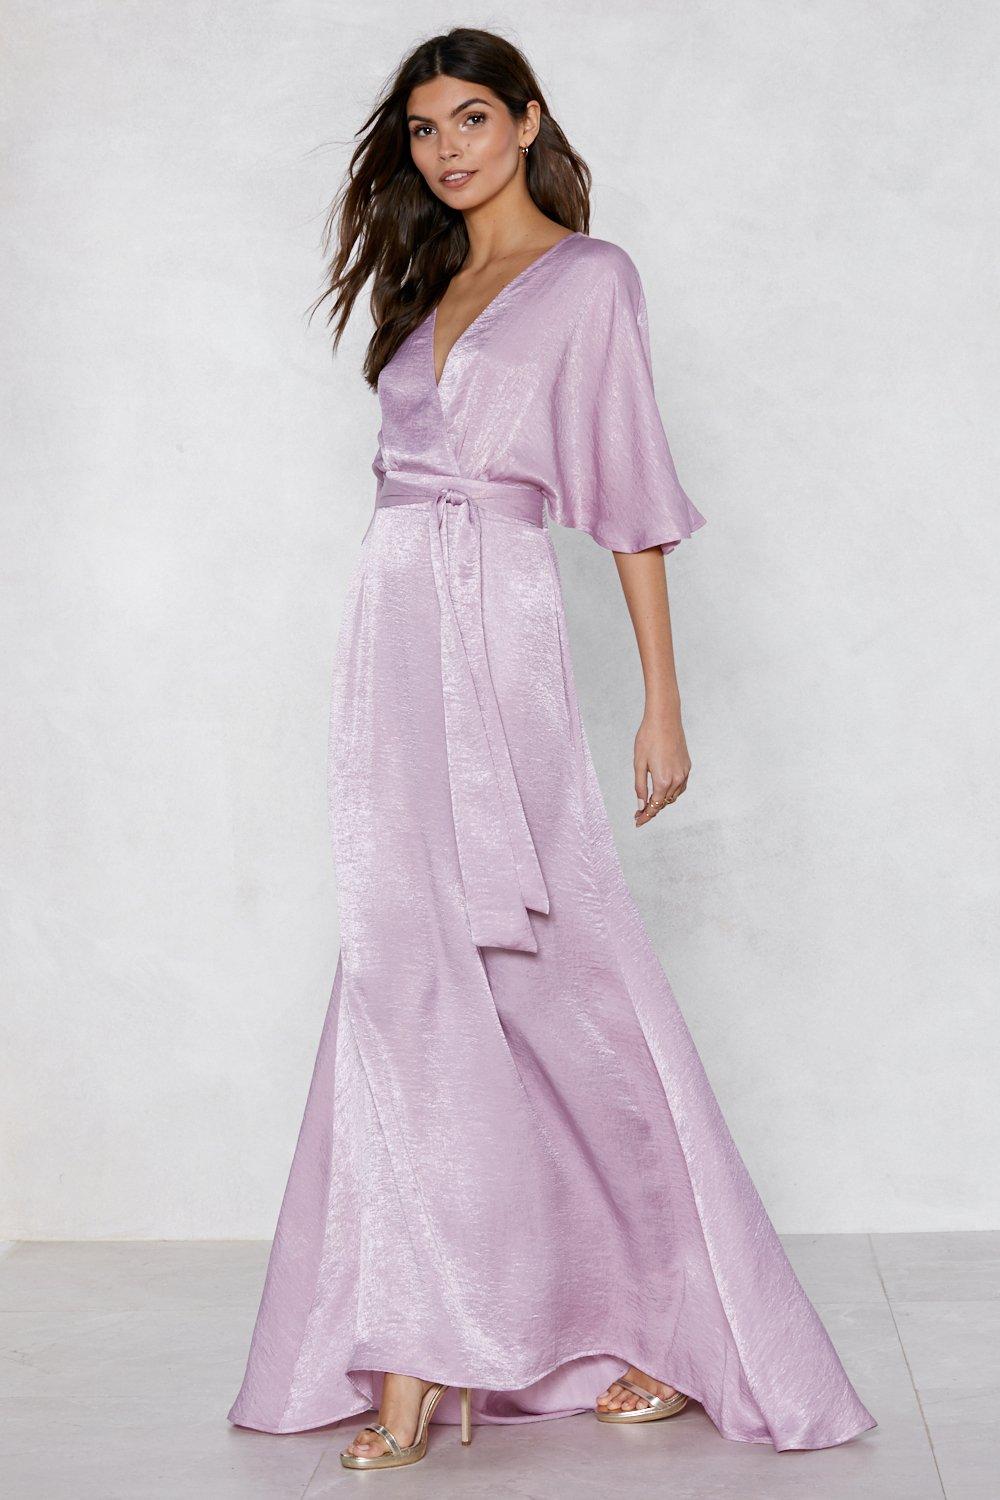 Rise to the Occasion Maxi Dress | Nasty Gal